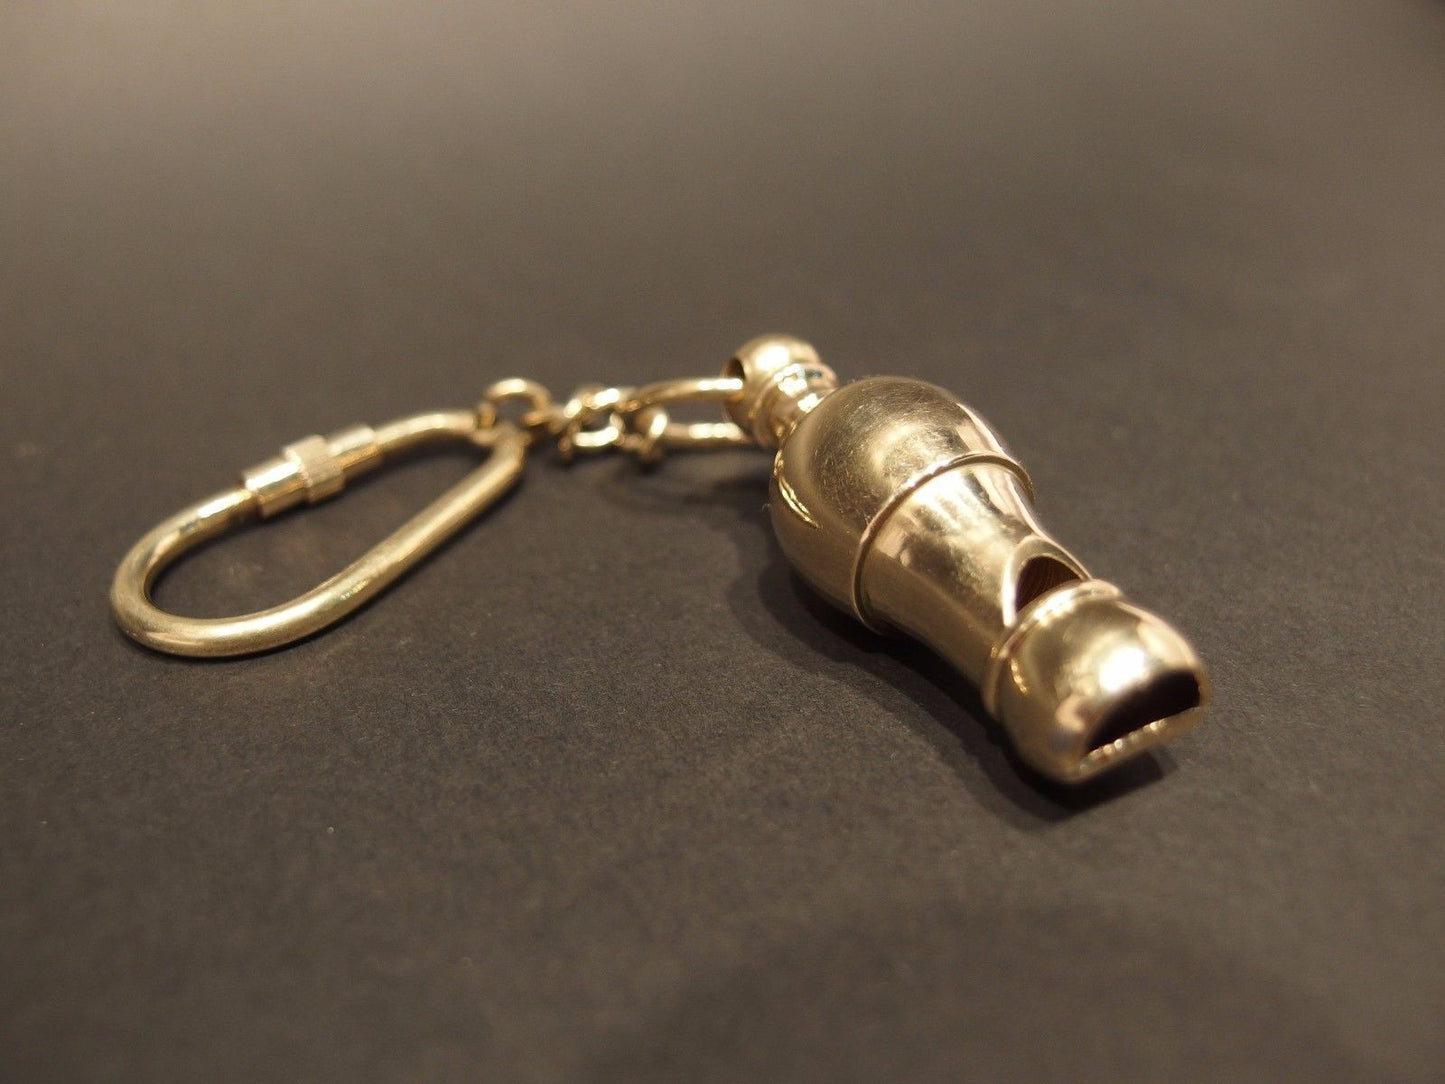 Vintage Antique Victorian Style, Gold Brass Pear Shape Whistle Pendant Key chain - Early Home Decor